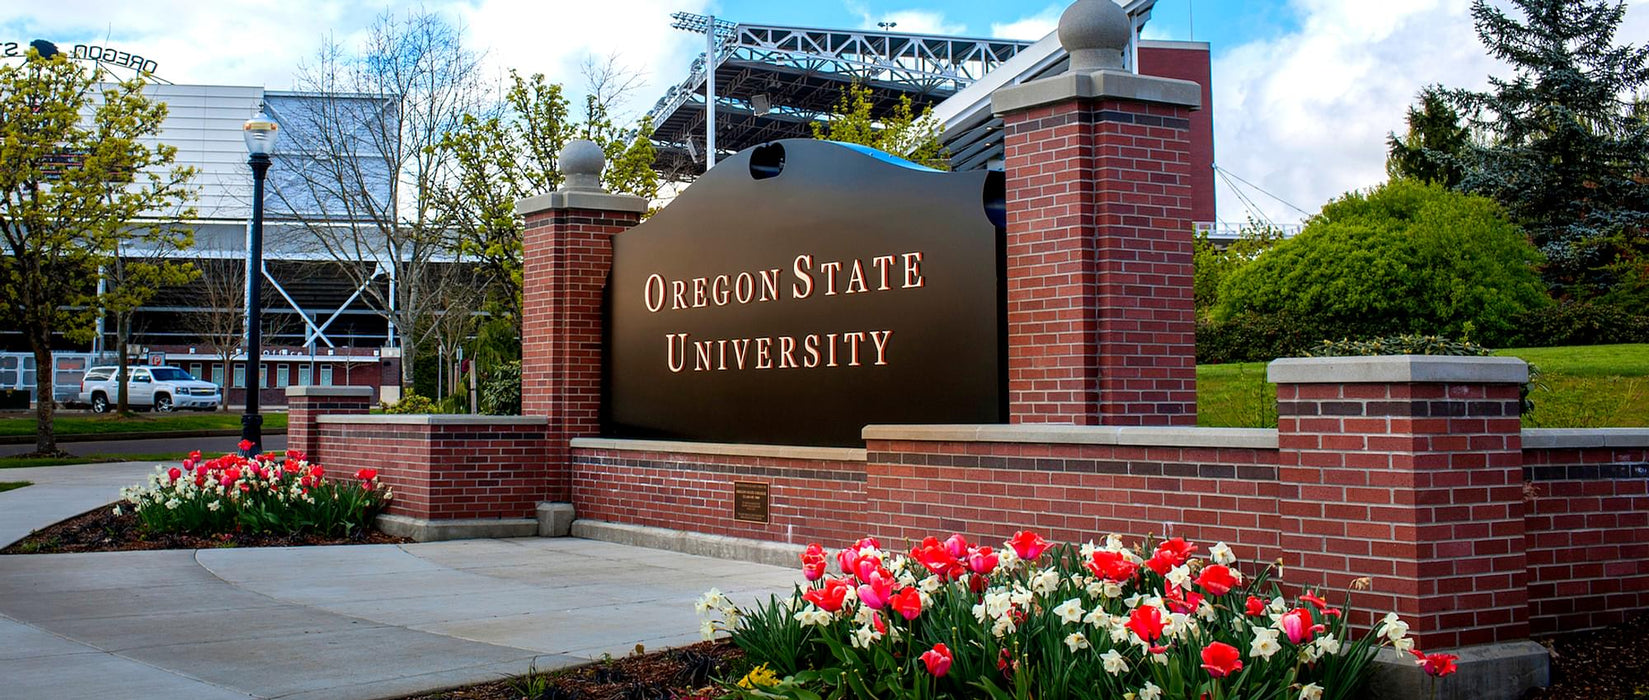 Master of Science - Water Resources Policy and Management at Oregon State University - Corvallis: Tuition: $29,700.00 USD/year (Scholarship Available)